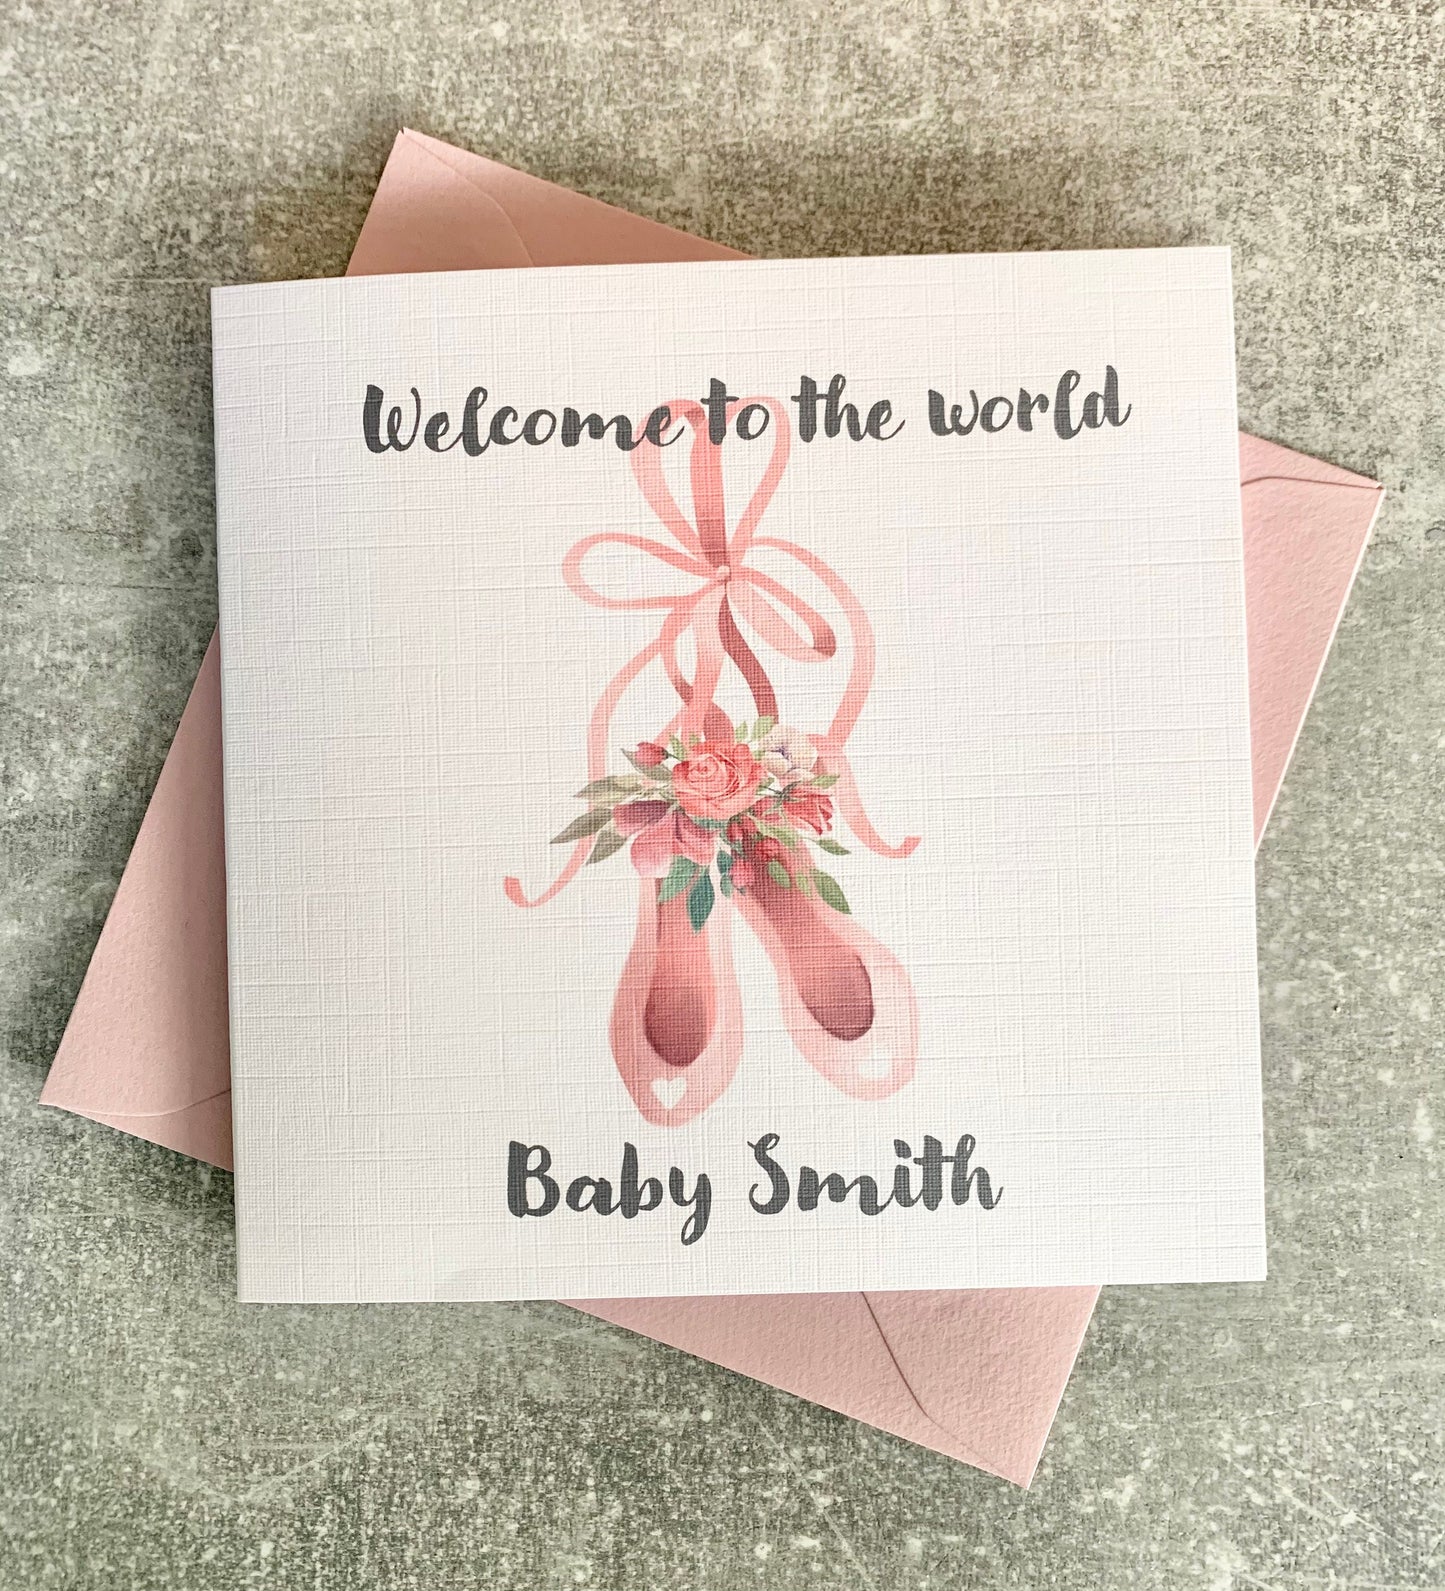 Welcome to the world card, new baby, personalised baby card, baby girl card, newborn baby card, new mum card, congrats on baby card